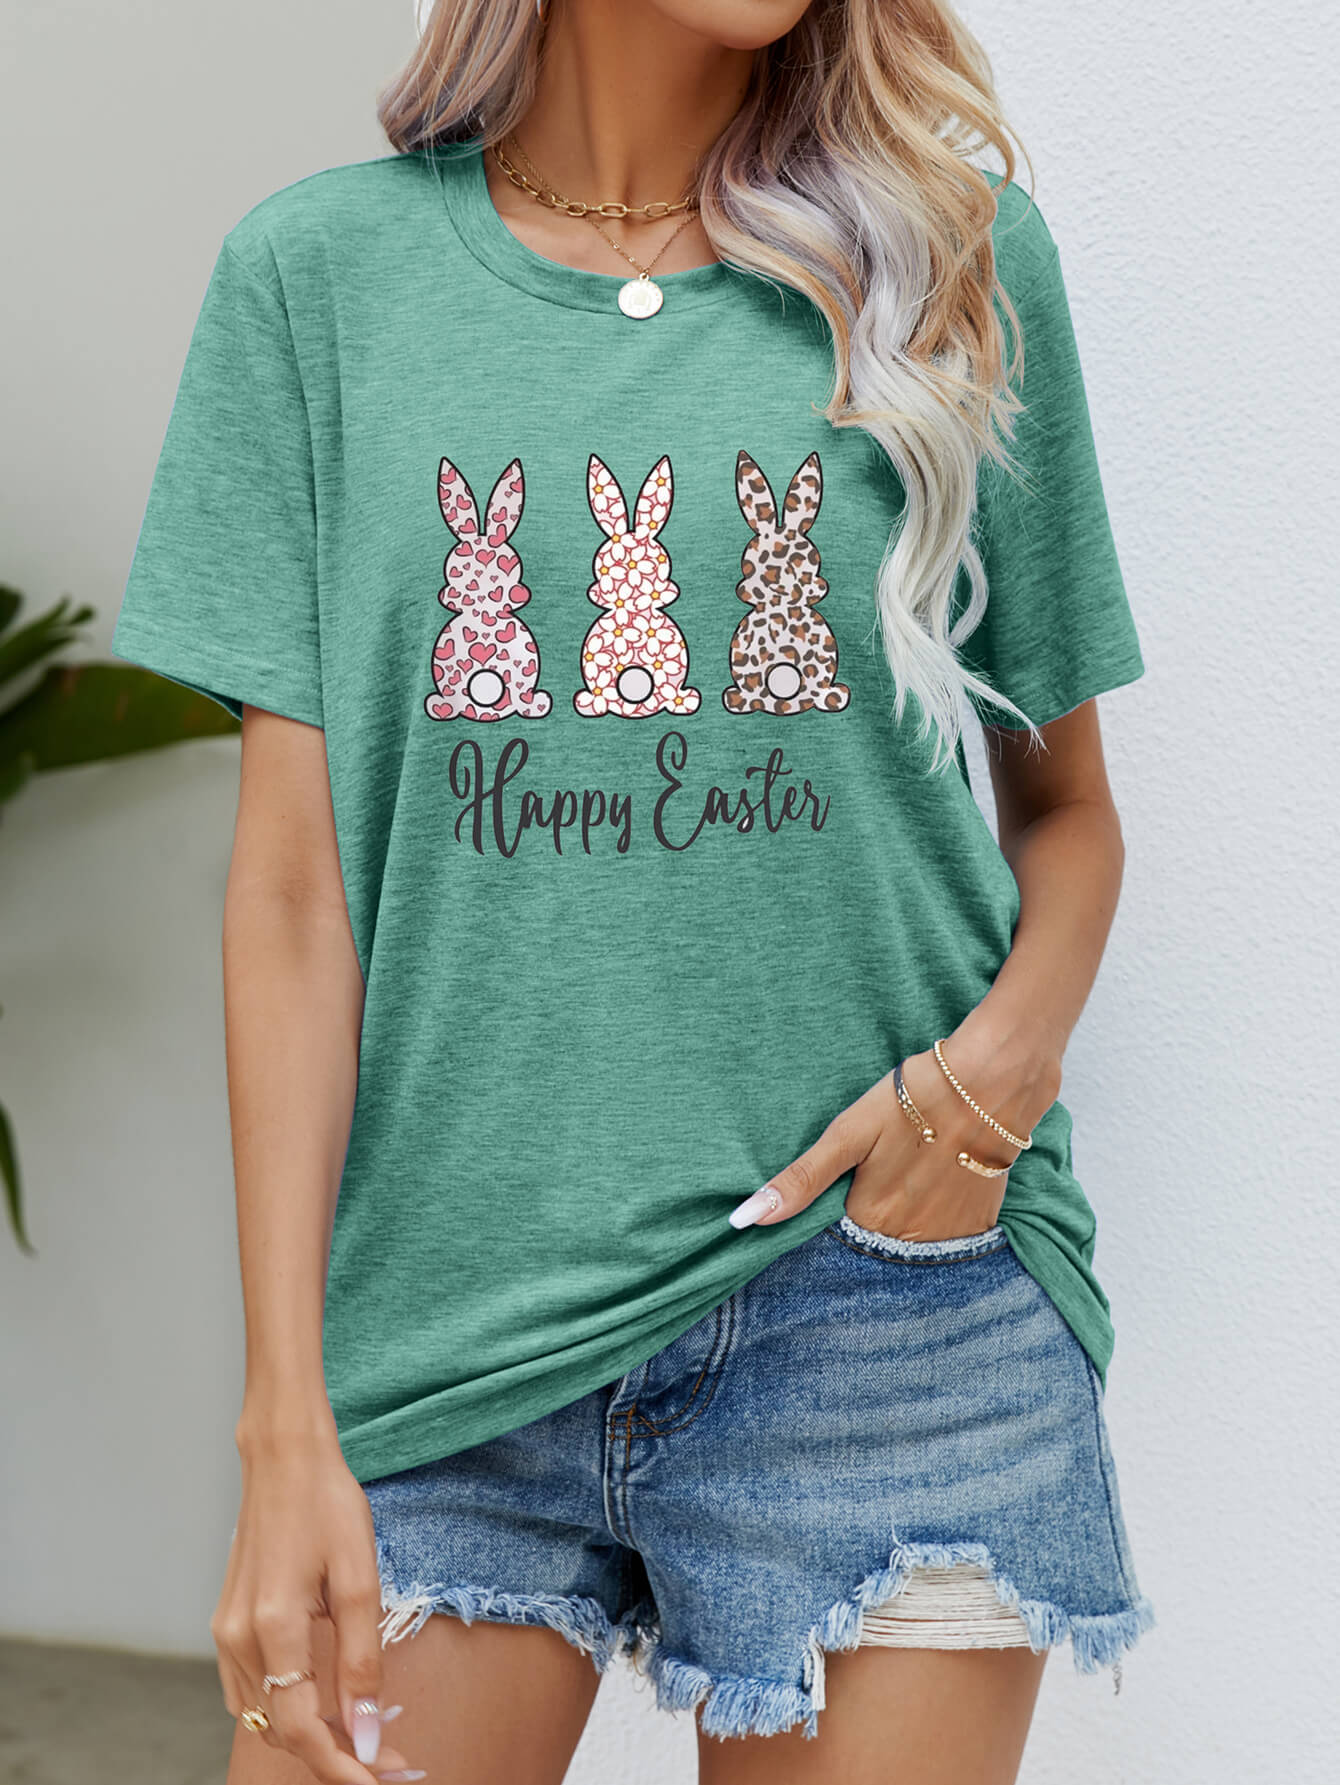 HAPPY EASTER Graphic Short Sleeve Tee - Green / S - T-Shirts - Shirts & Tops - 7 - 2024